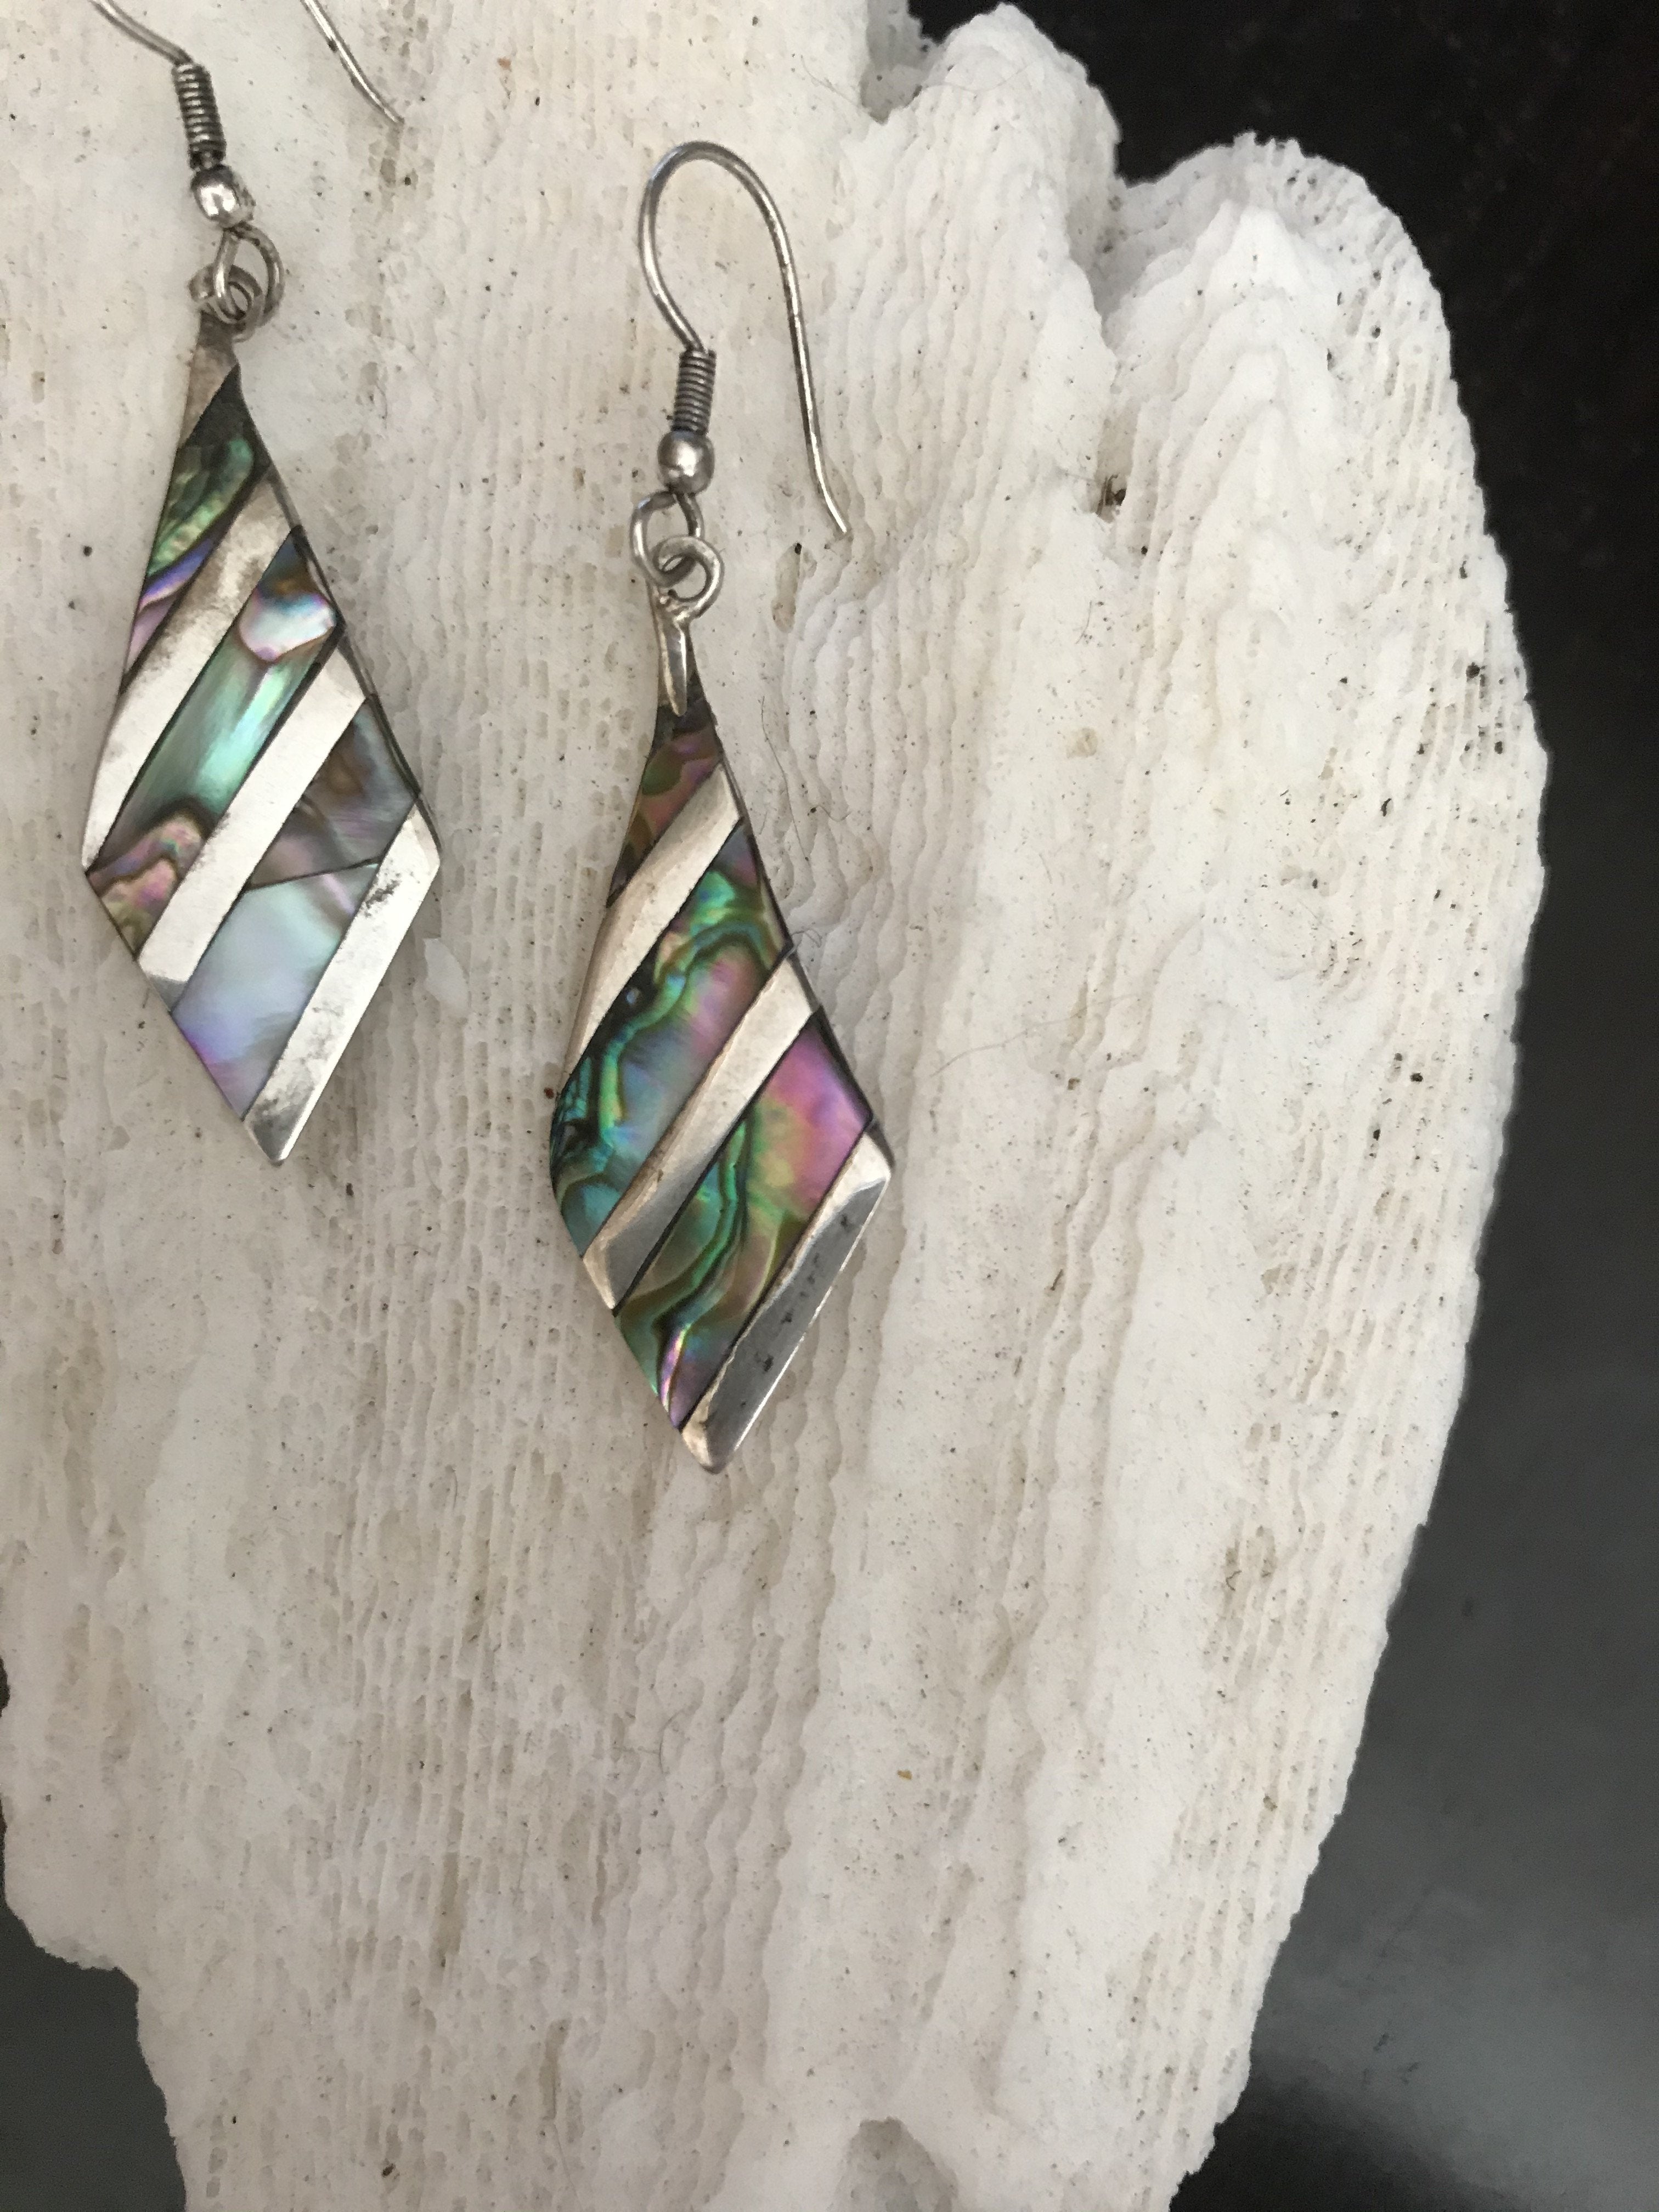 Mexican Sterling Silver Abalone Inlaid Quadrilateral Triangle Earrings - Shop Thrifty Treasures